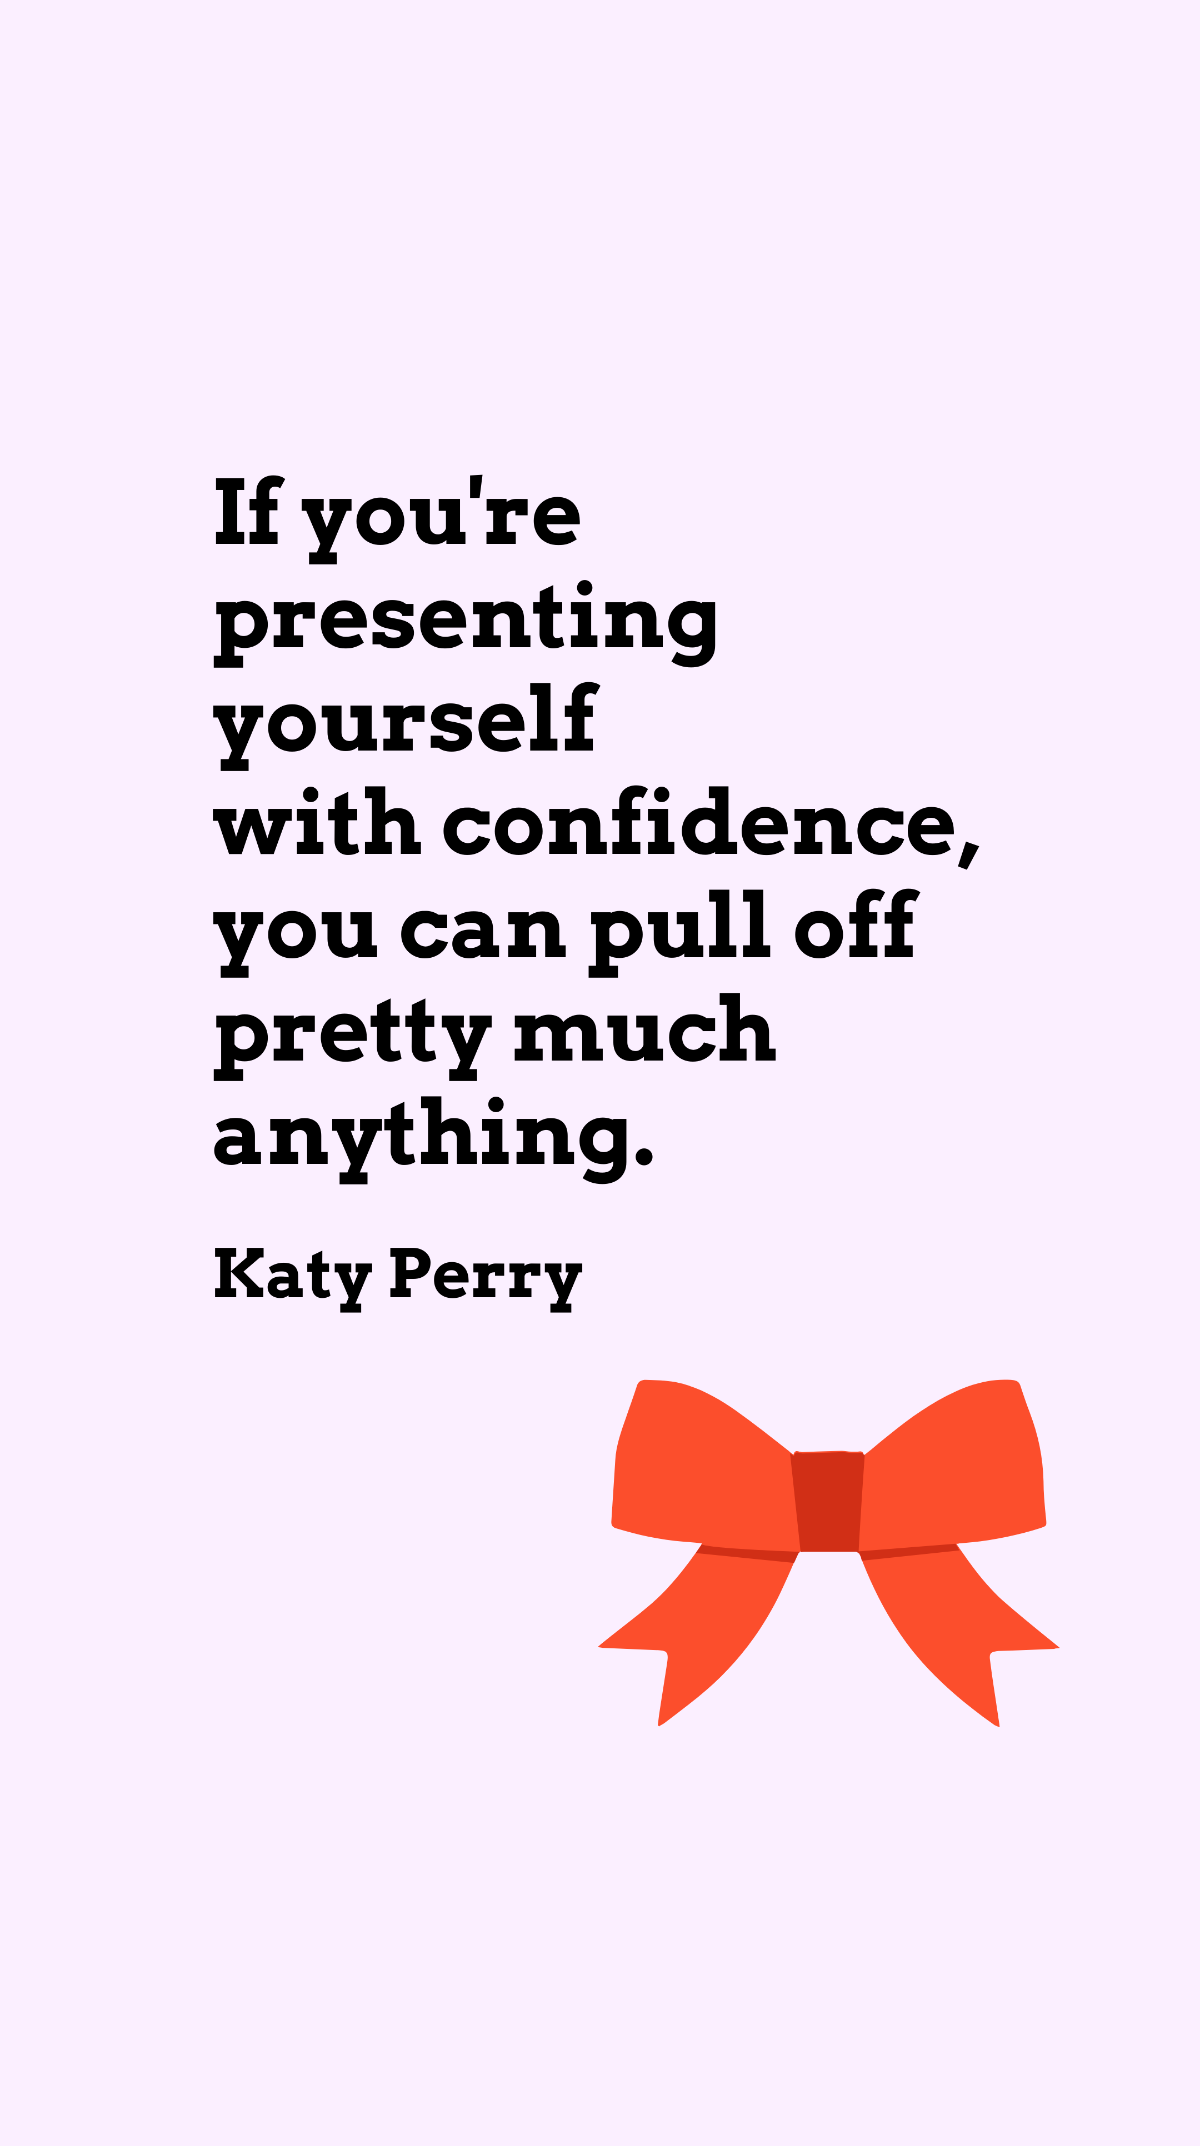 Free Katy Perry - If you're presenting yourself with confidence, you can pull off pretty much anything. Template